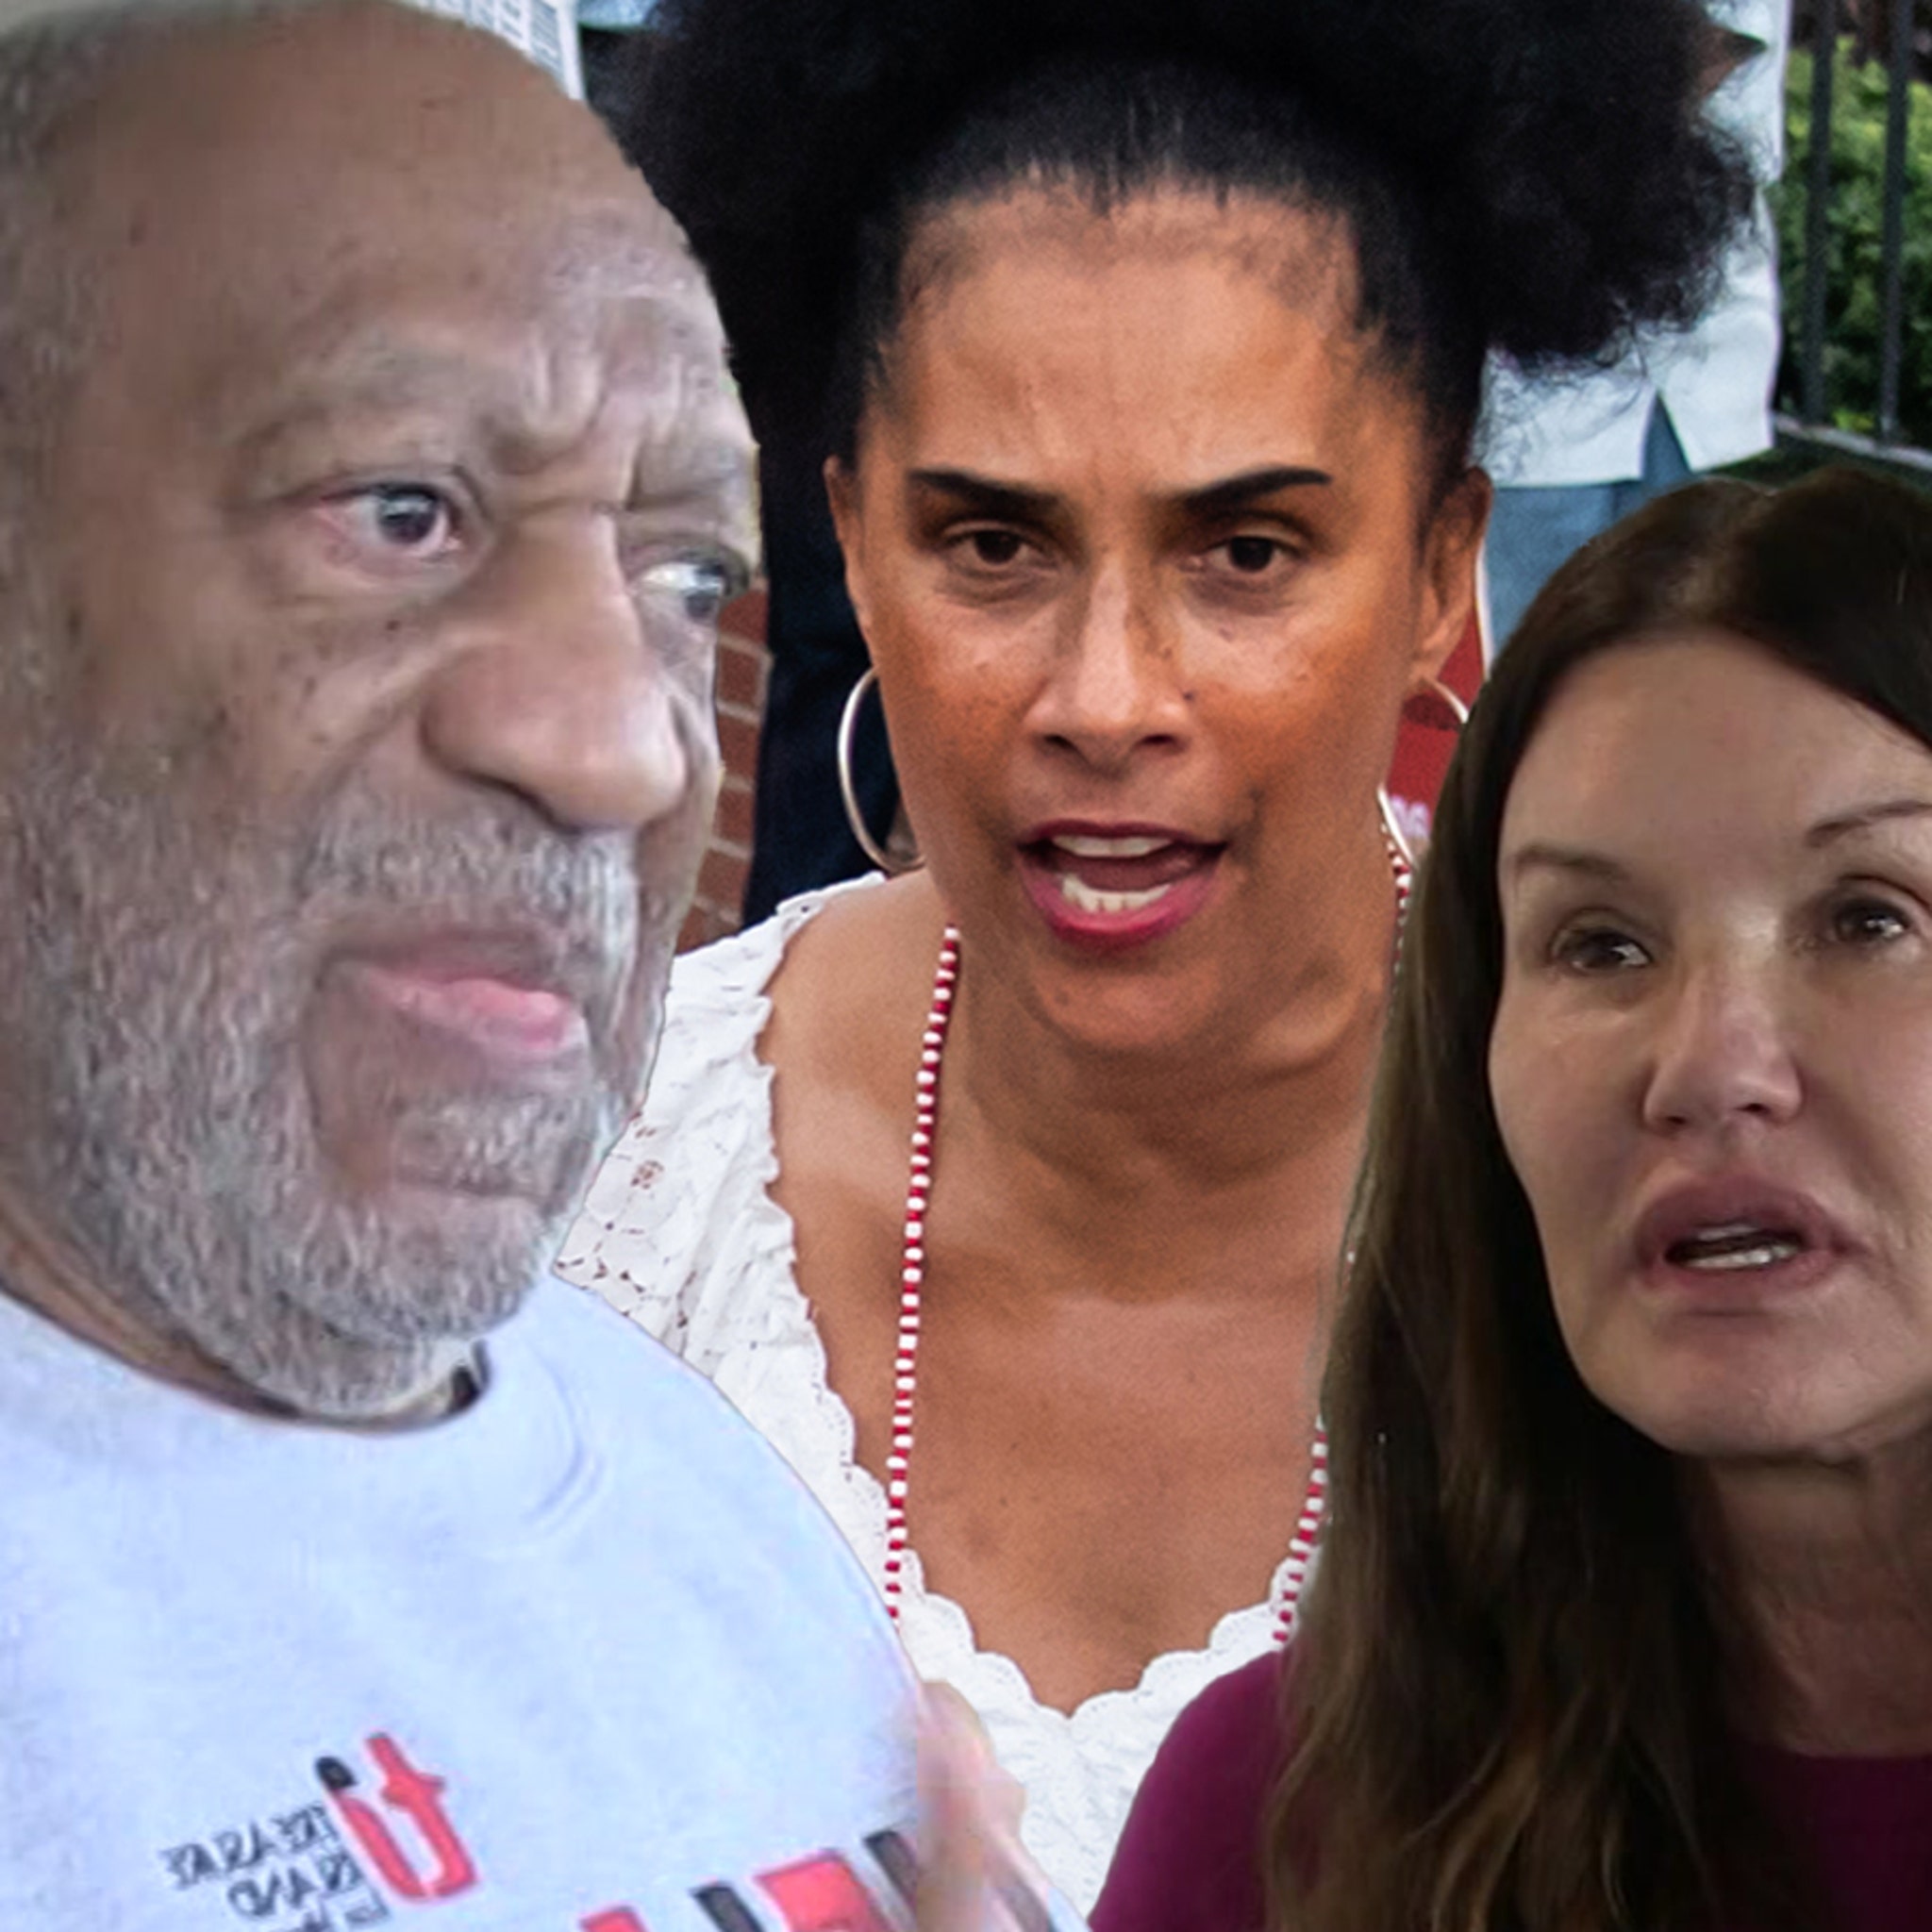 Bill Cosby Sued By Janice Dickinson, Lili Bernard For Alleged Sexual Assault image